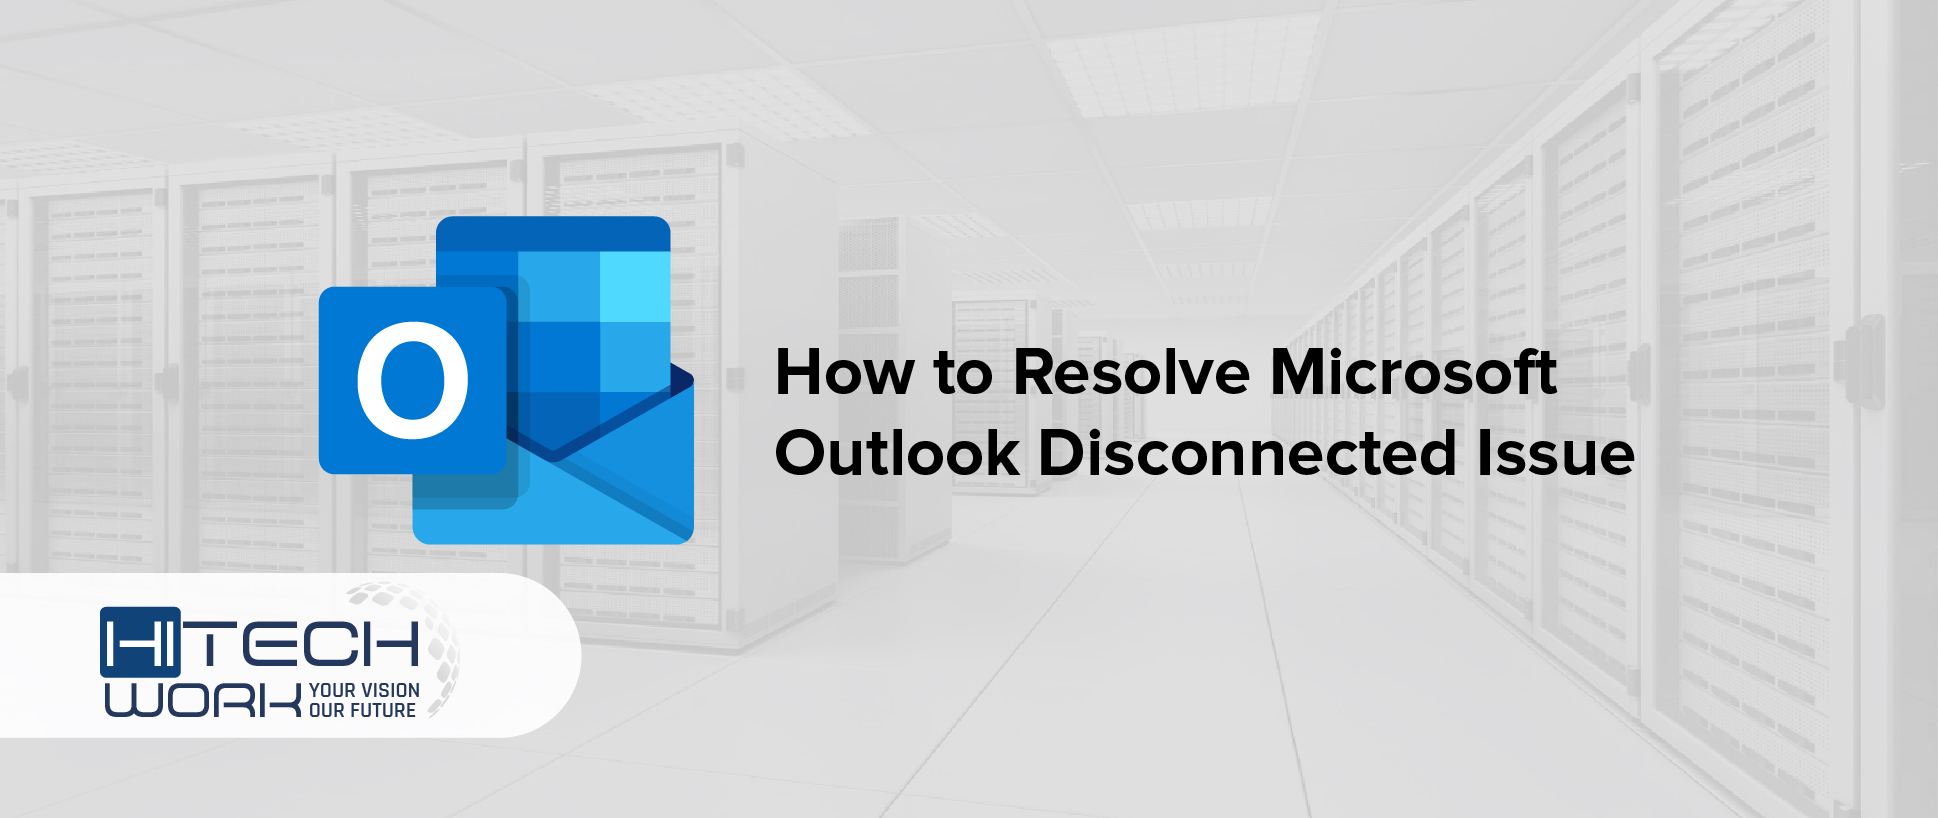 How to Resolve Microsoft Outlook Disconnected Issue